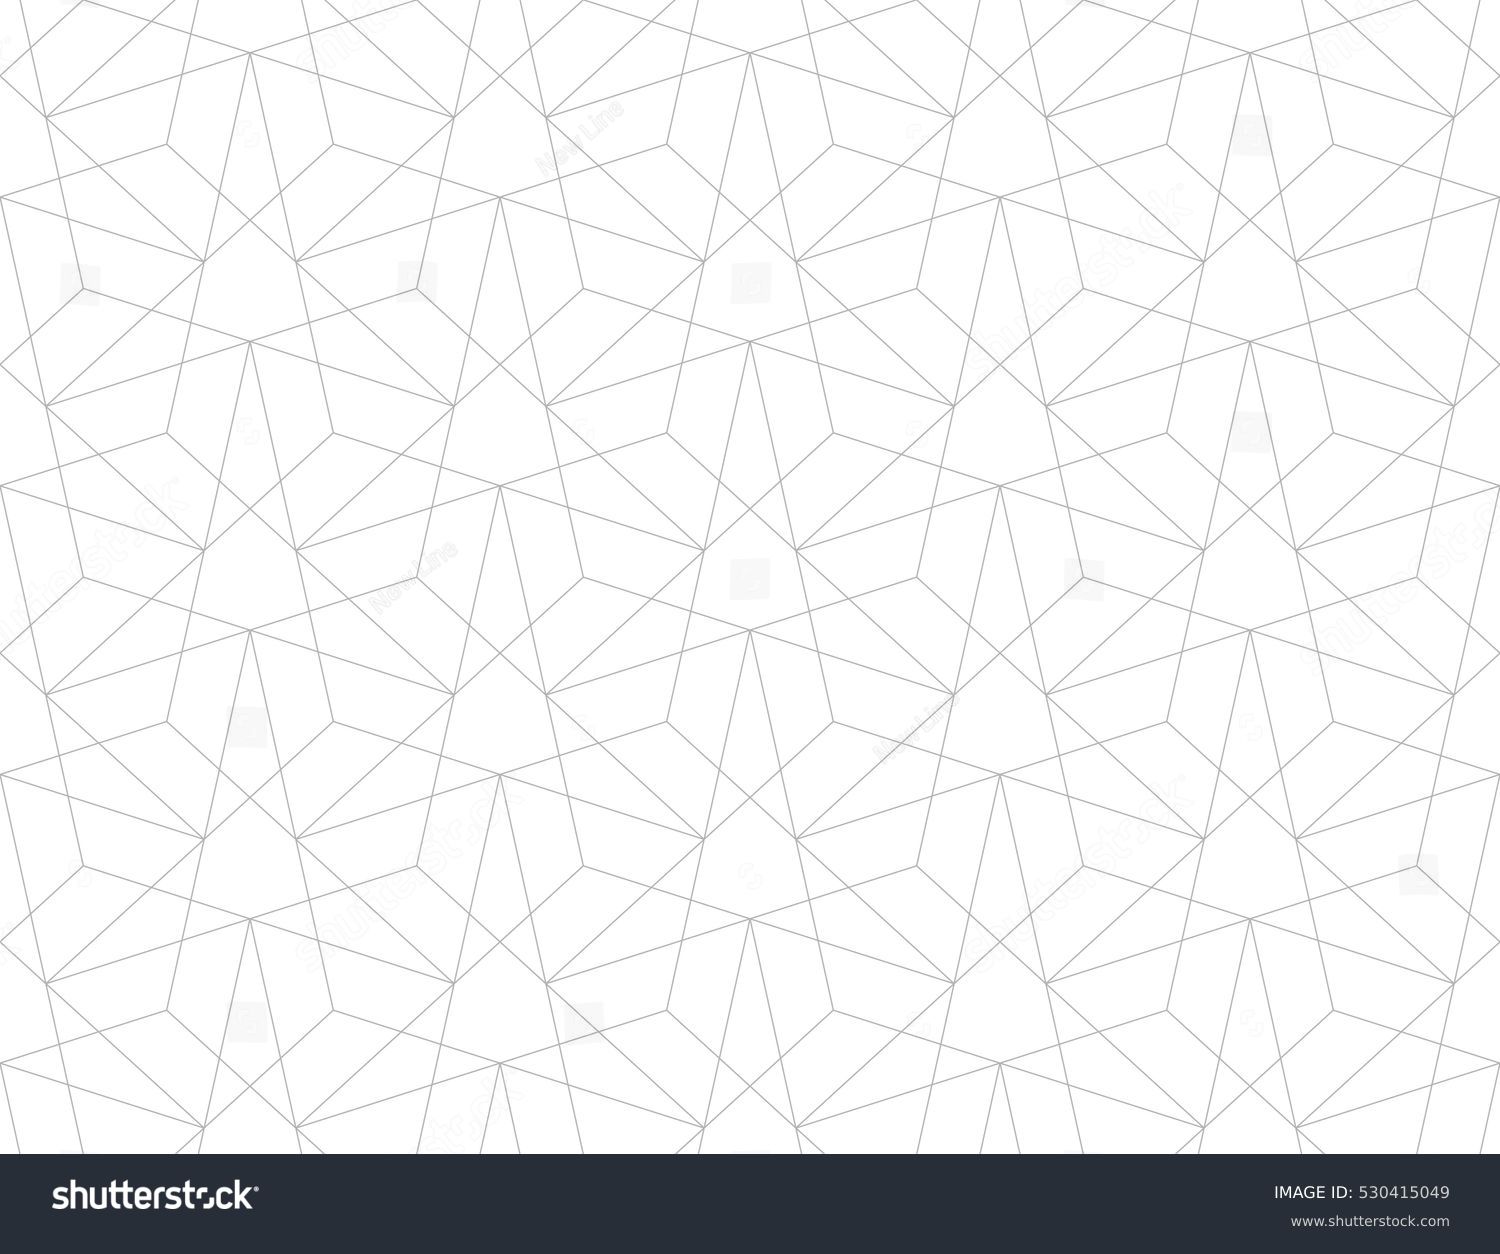 Abstract geometric pattern with crossing thin straight  lines. Stylish texture in gray color. Seamless linear pattern.